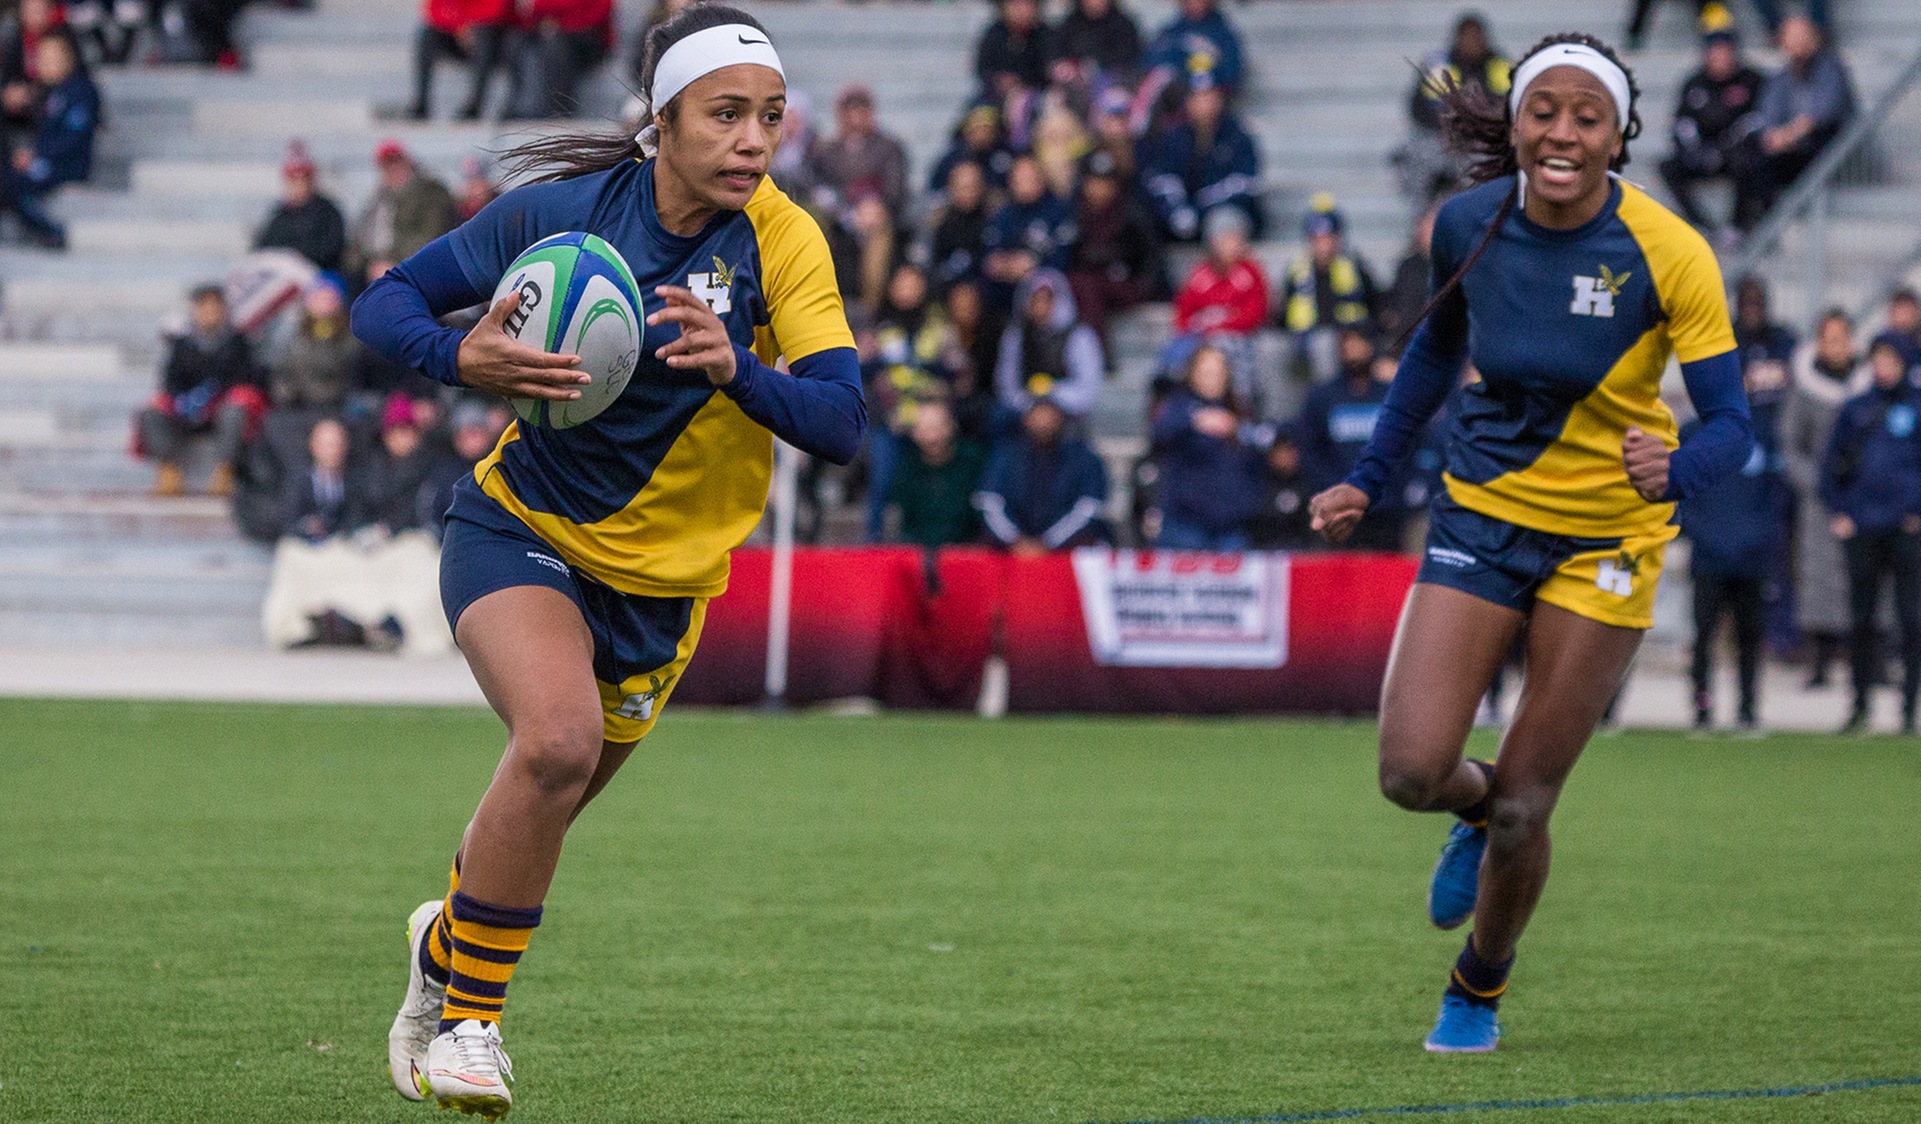 WOMEN’S RUGBY 7’S GET CALL TO PLAY IN COLLEGIATE 7’S NATIONAL CHAMPIONSHIP